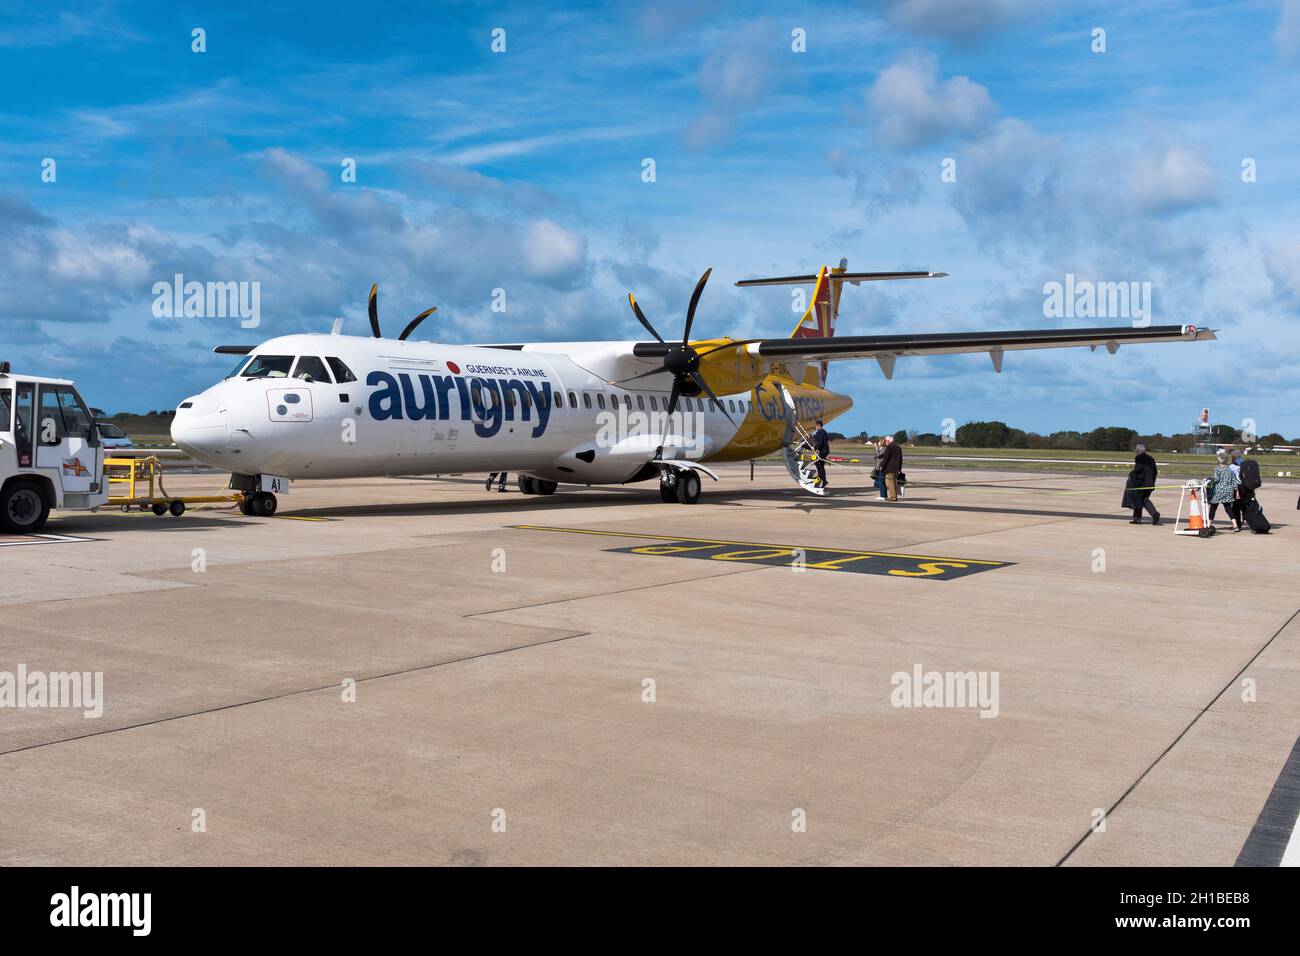 dh Aurigny ATR 72 212 AIRPORT GUERNSEY People travellers boarding airline aeroplane air services turboprop aircraft ATR 72-212A plane passengers 212a Stock Photo